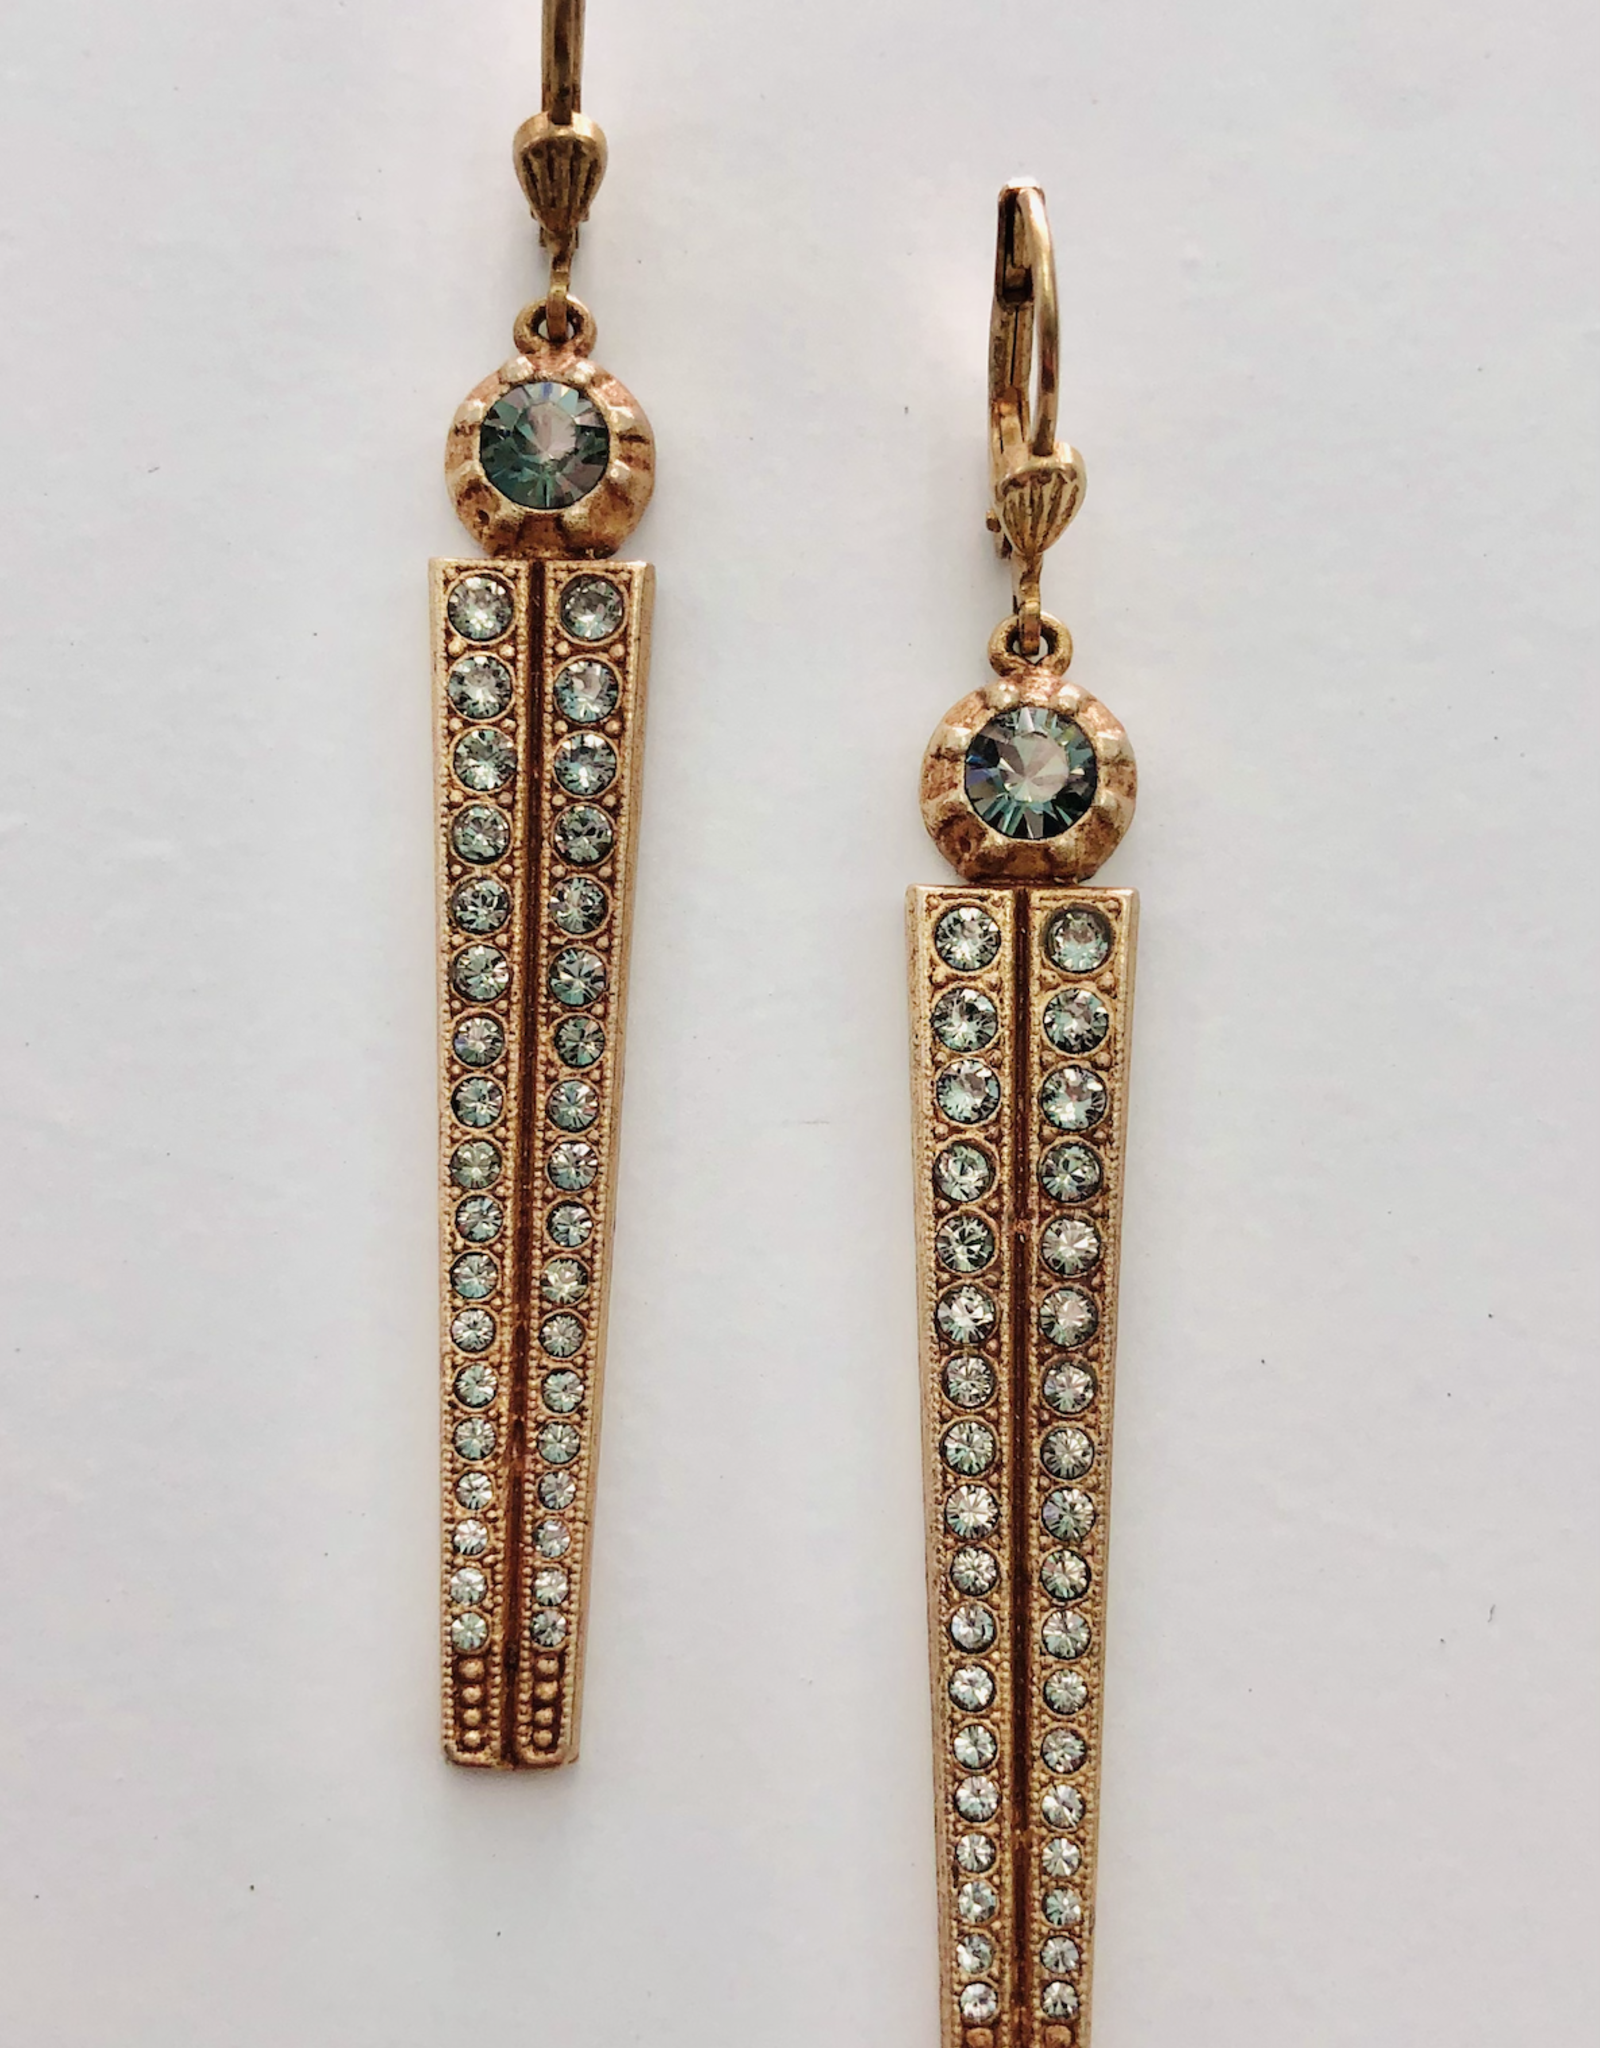 Earring Spear With Rhinestones Gold